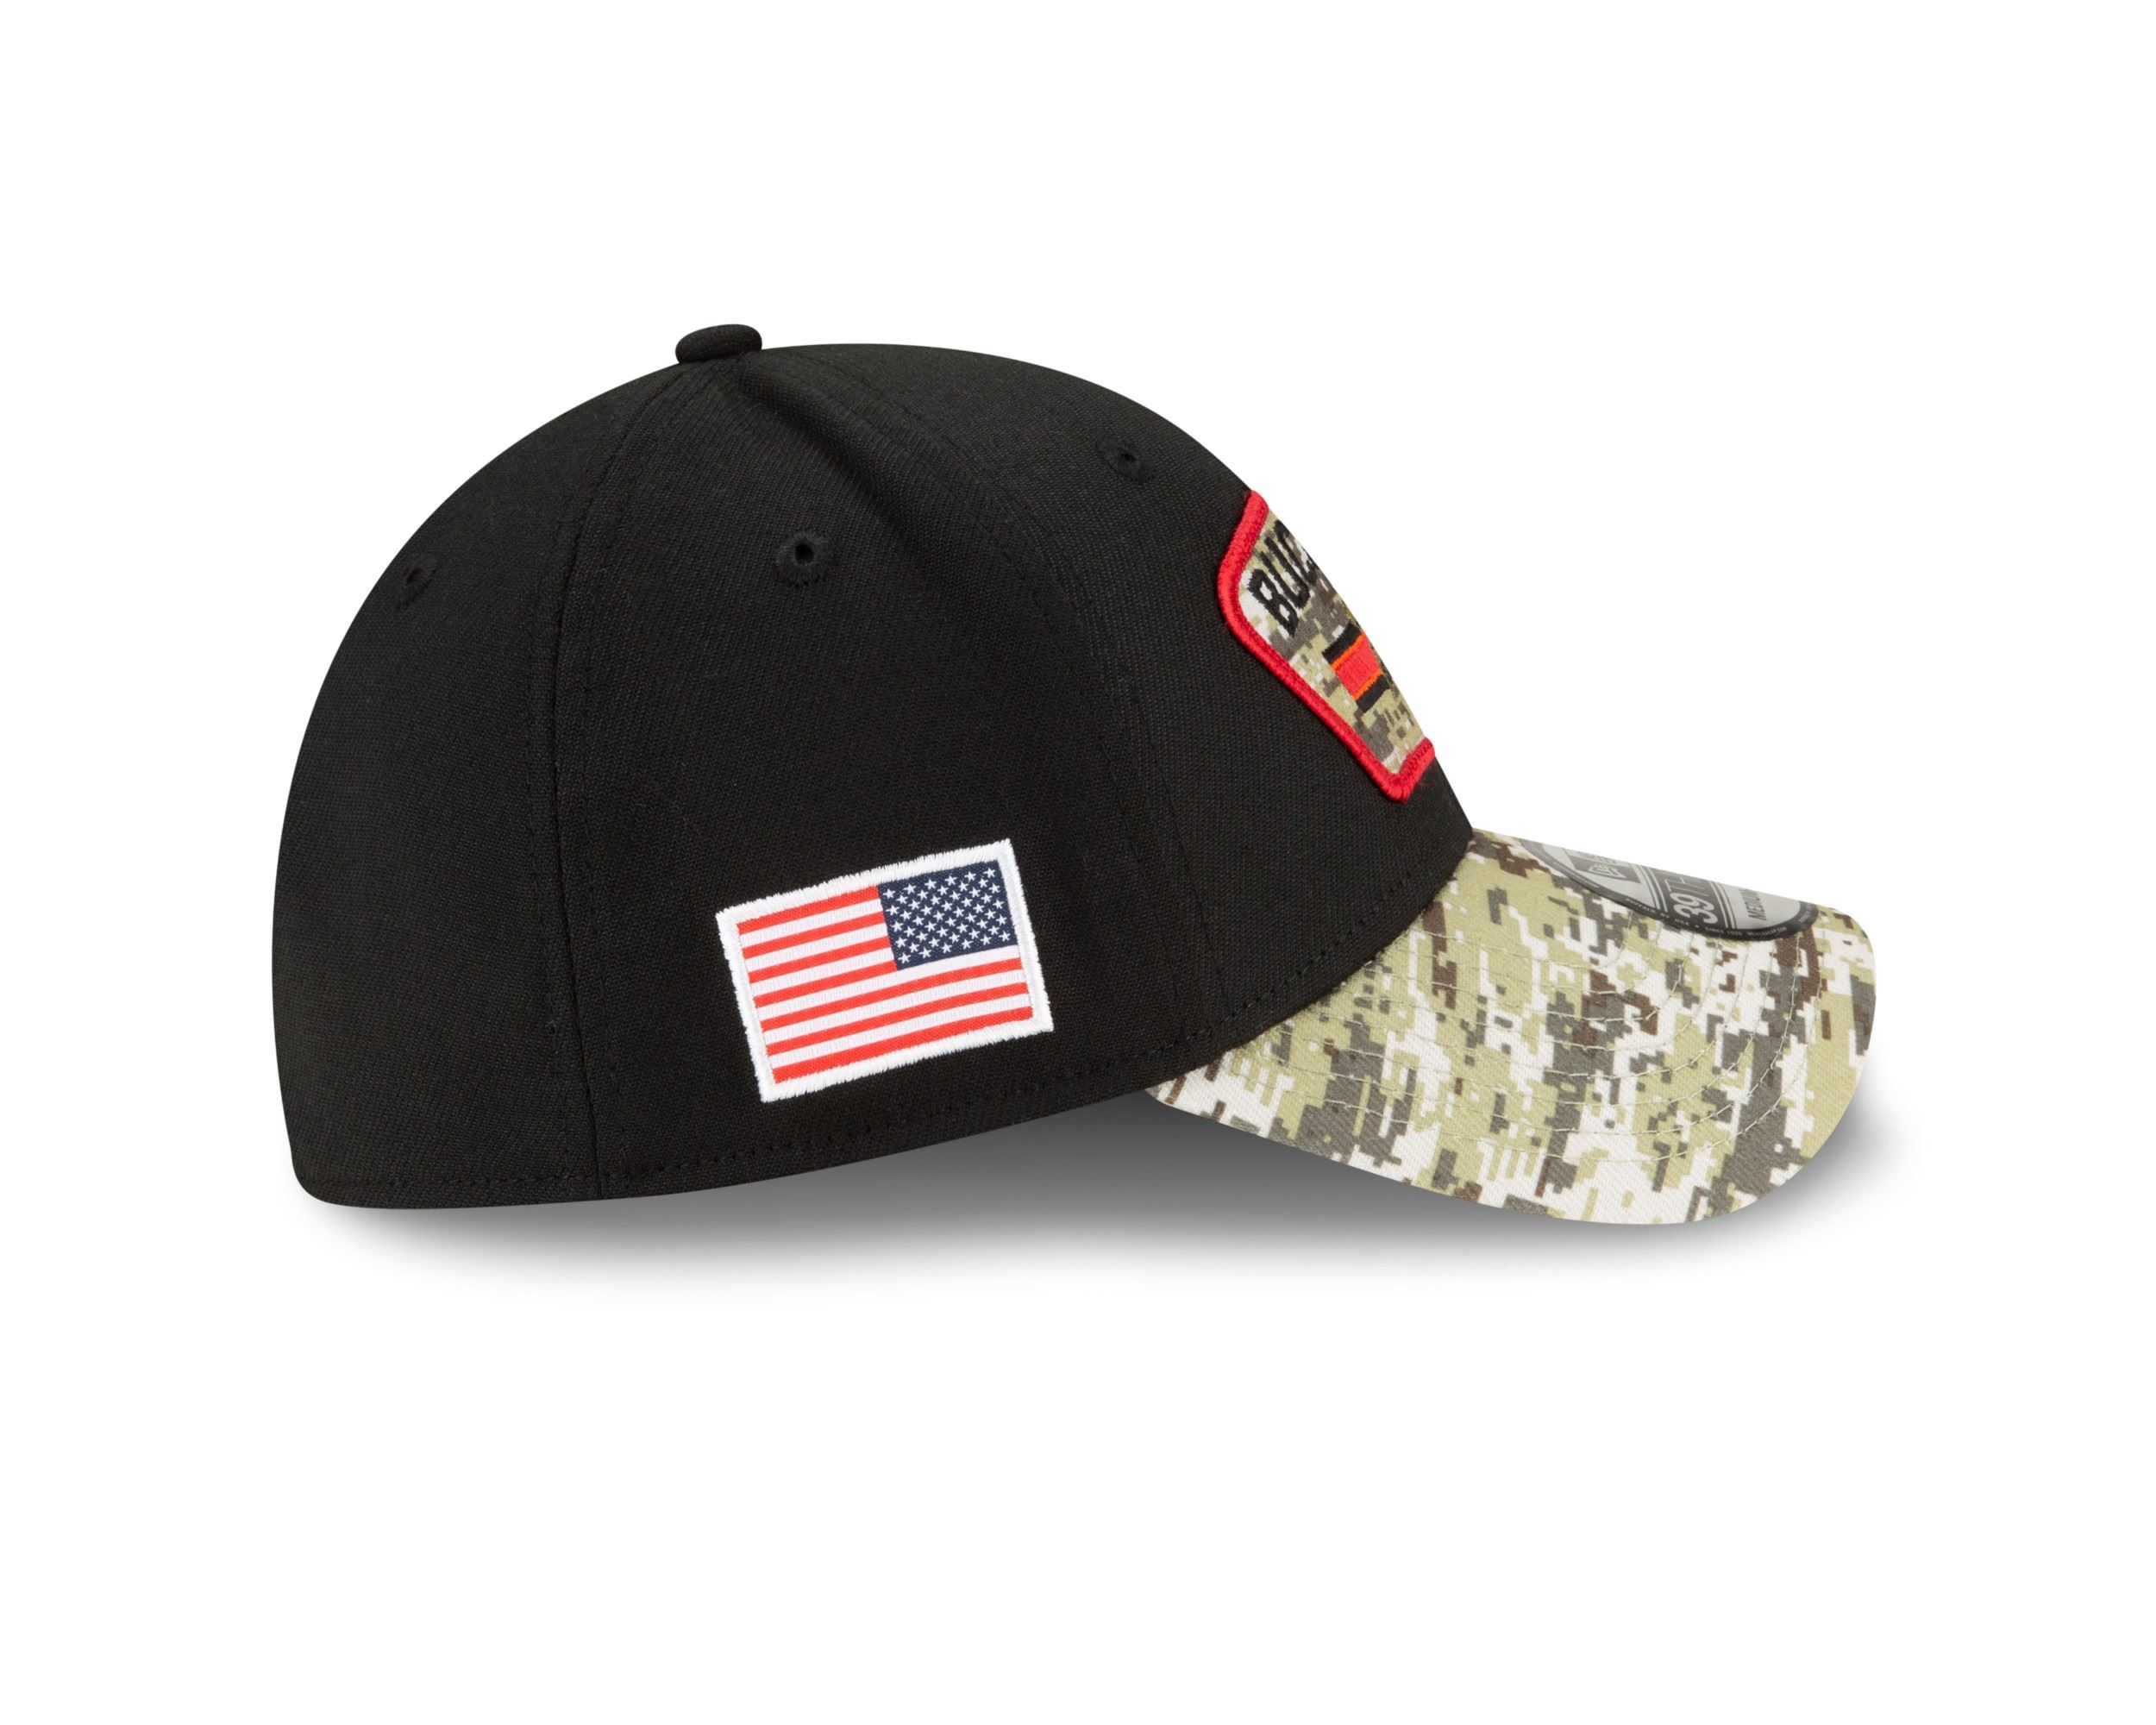 Tampa Bay Buccaneers NFL On Field 2021 Salute to Service Black 39Thirty Stretch Cap New Era